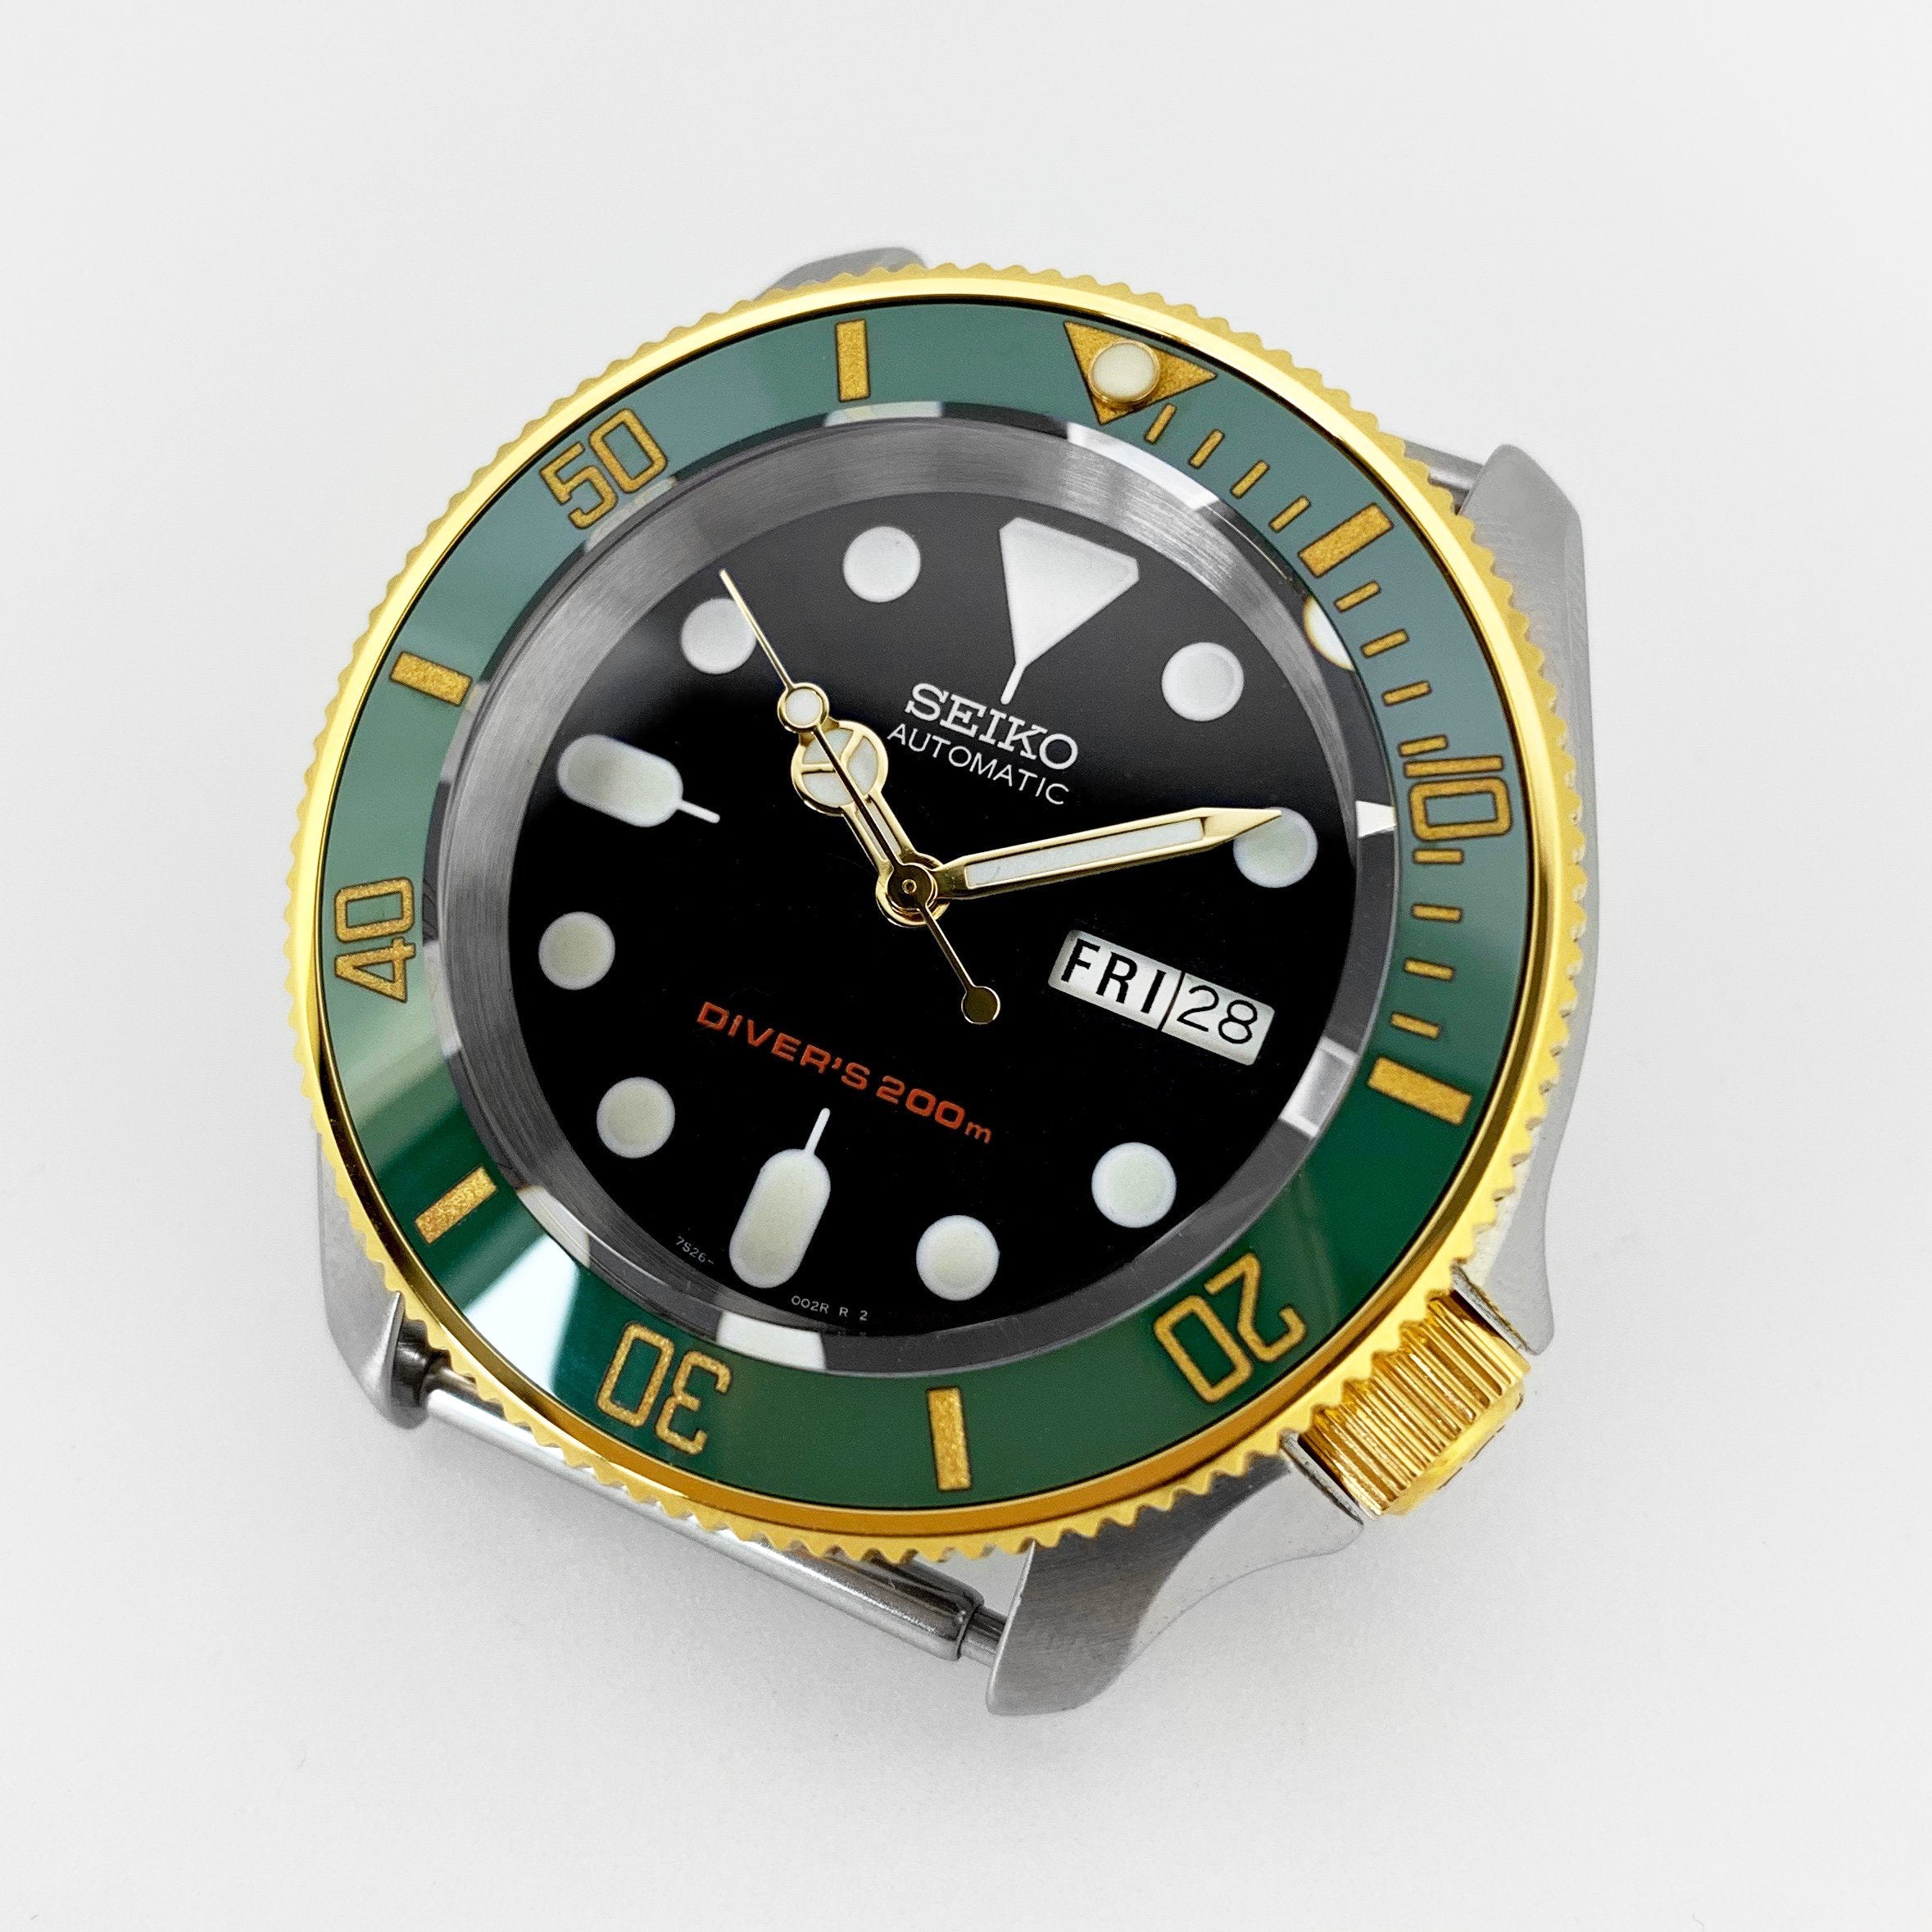 Bezel - SKX007/SRPD Coin Edge - Polished PVD Gold - DLW WATCHES